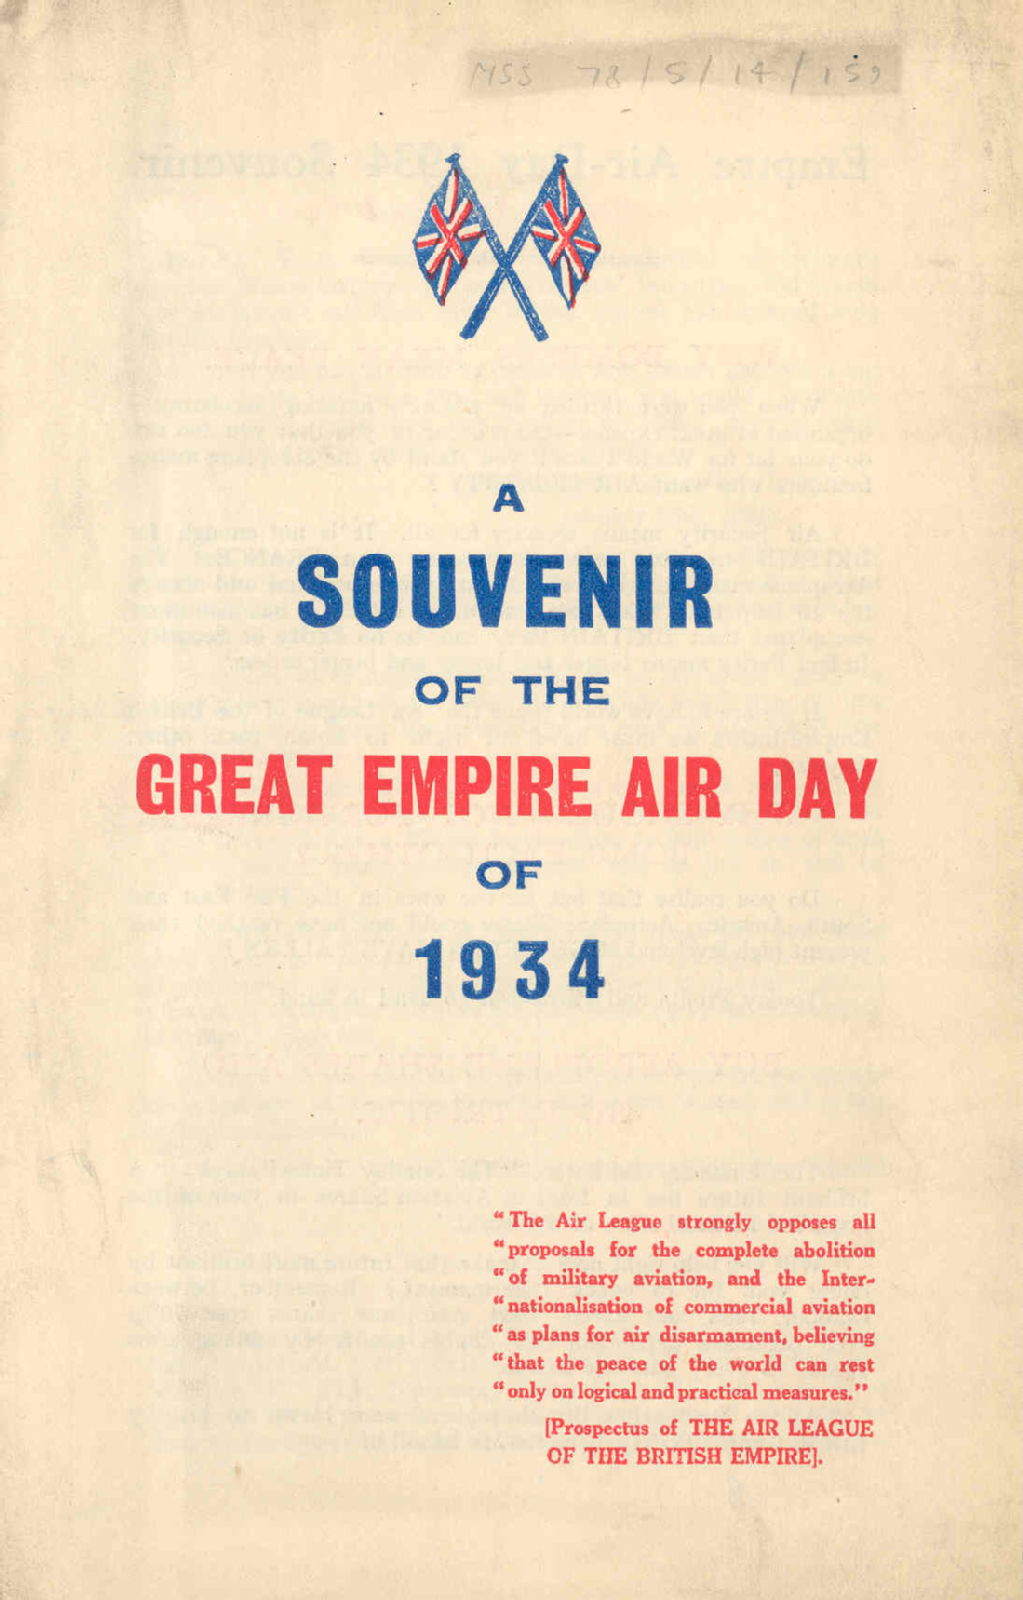 'A Souvenir of the Great Empire Air Day of 1934'